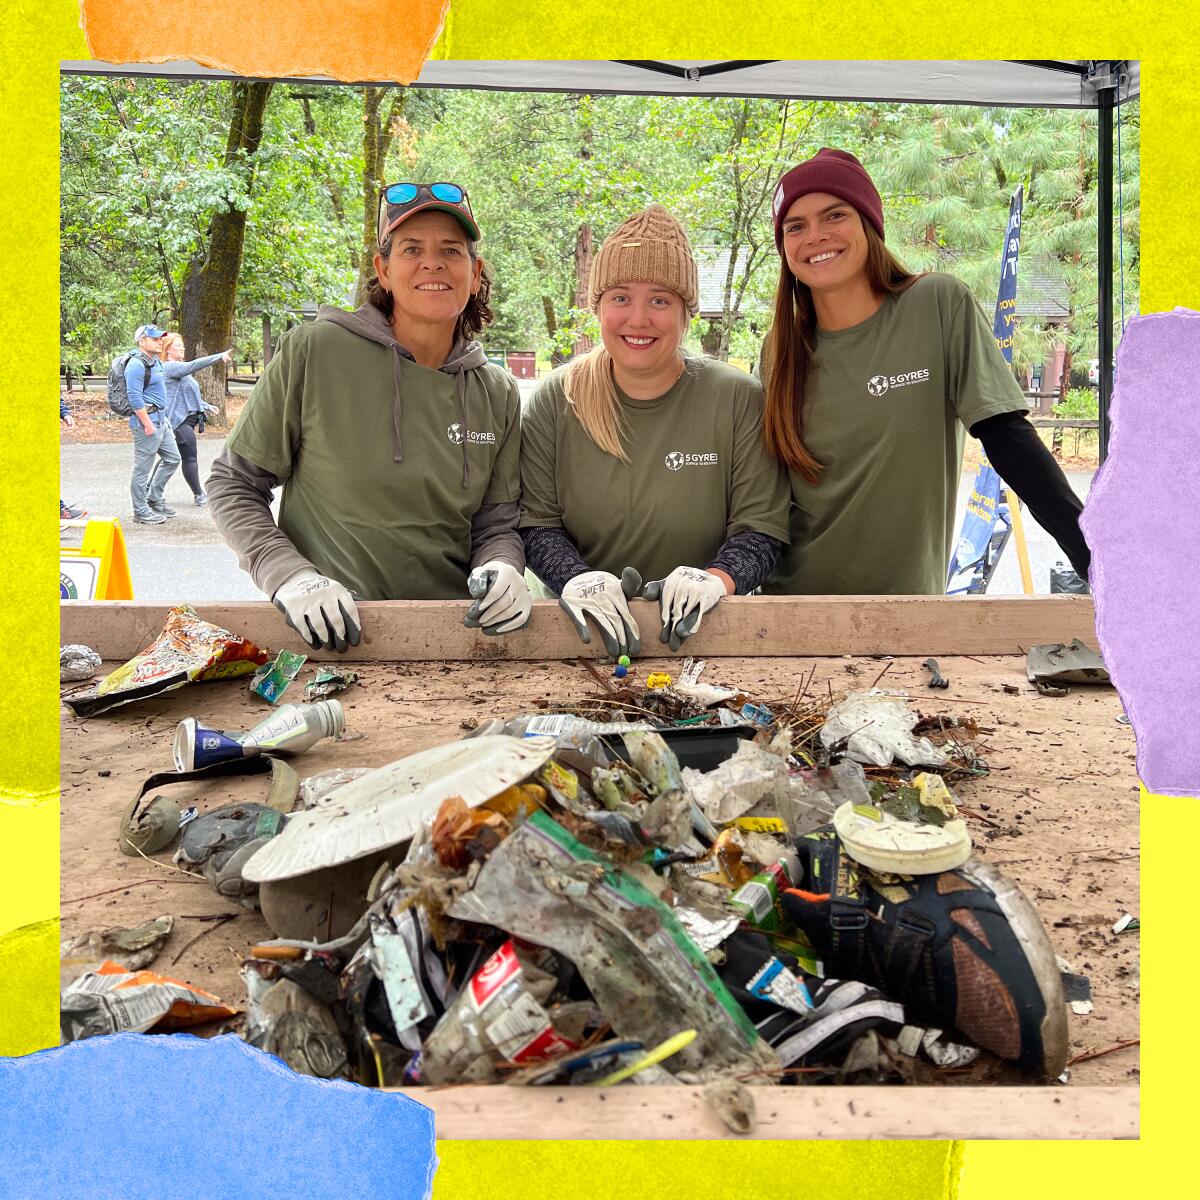 Three women in matching T-shirts, beanies and work gloves smile for a photo behind a pile of trash.